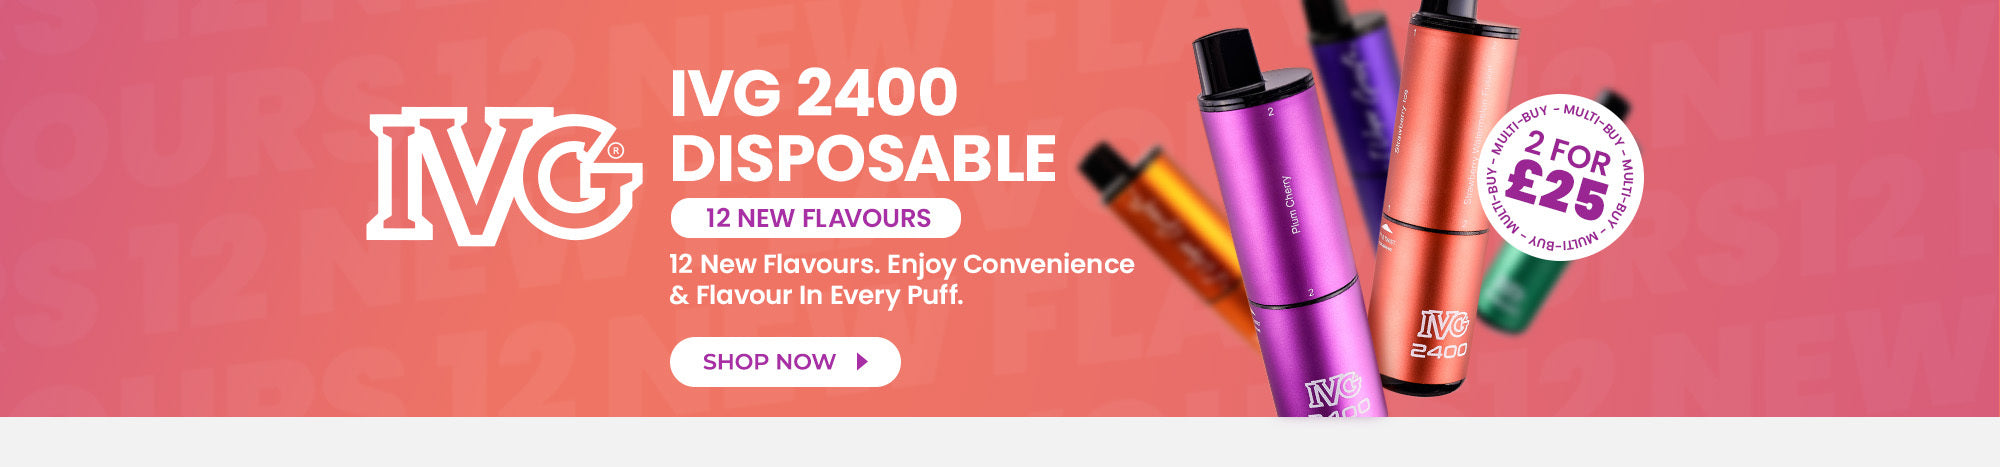 Discover the latest IVG 2400 Disposable Vape Flavours - Buy any 2 for £25